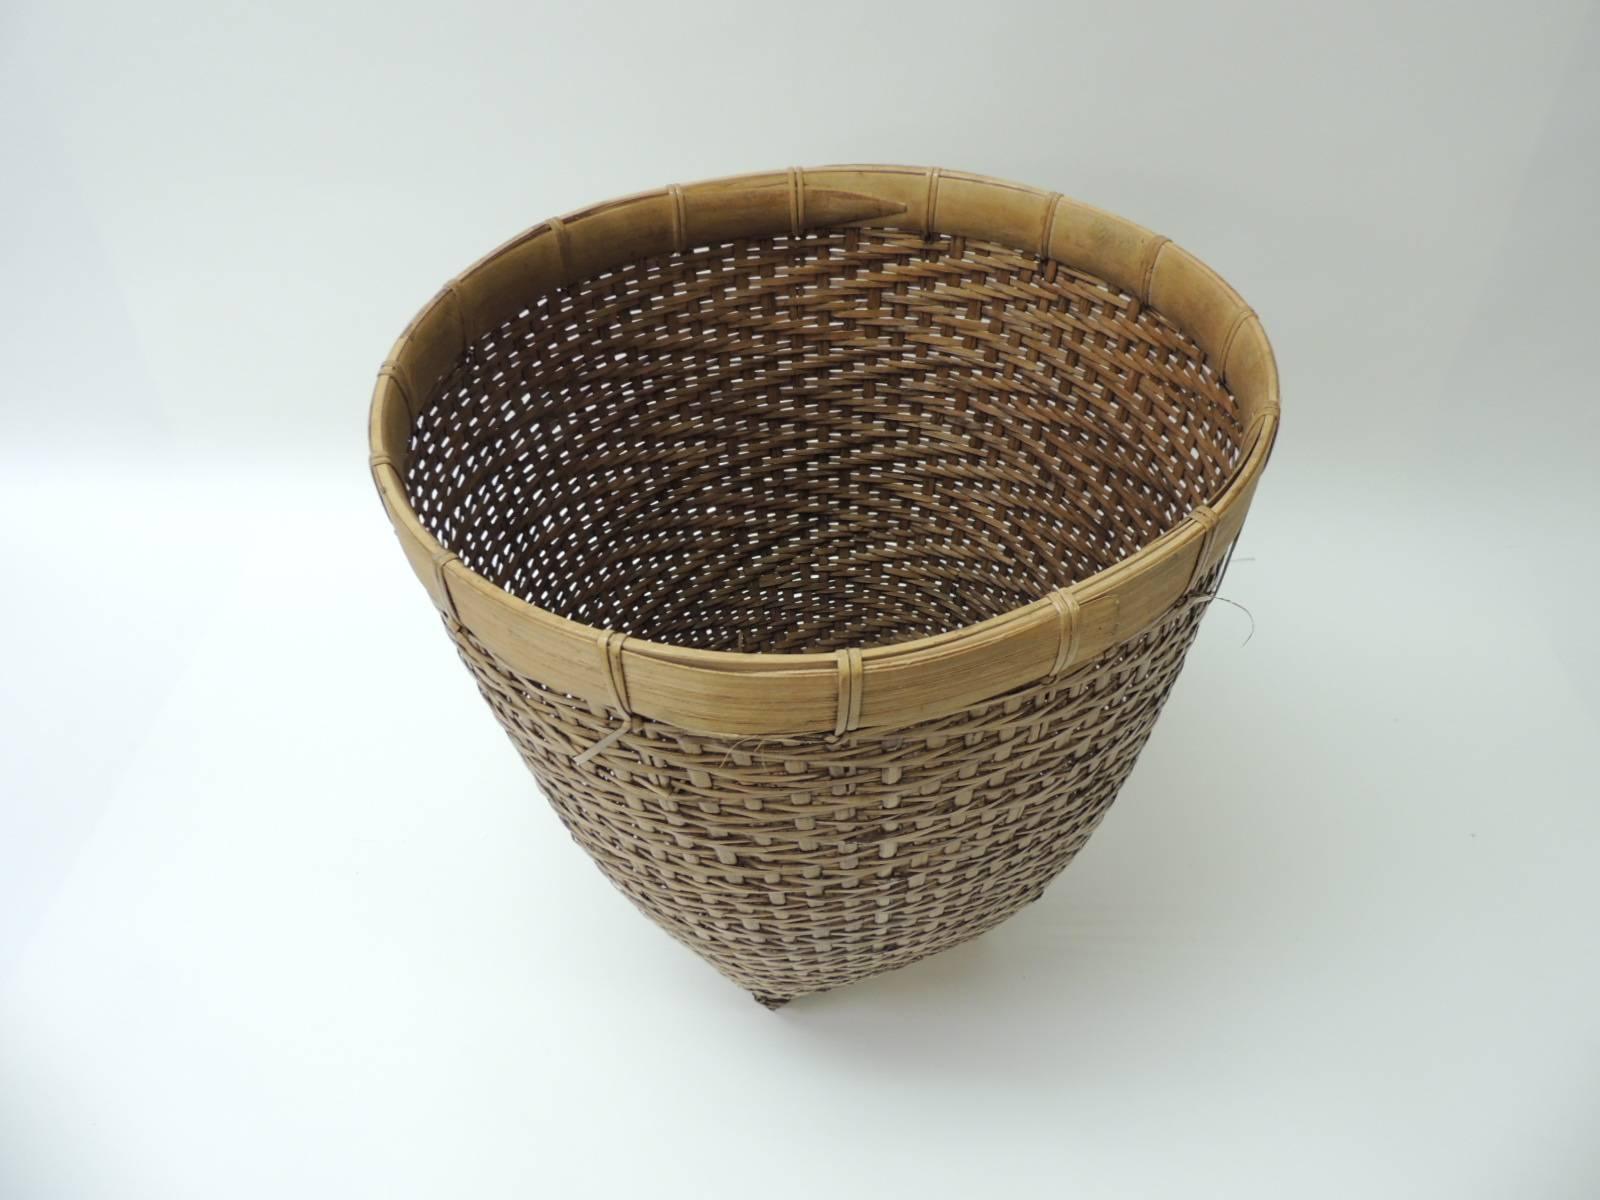 Vintage rattan and bamboo waste basket or planter.
Tight woven body with flat bamboo feet and around the top of the basket.
Size: 12 x 14 H.